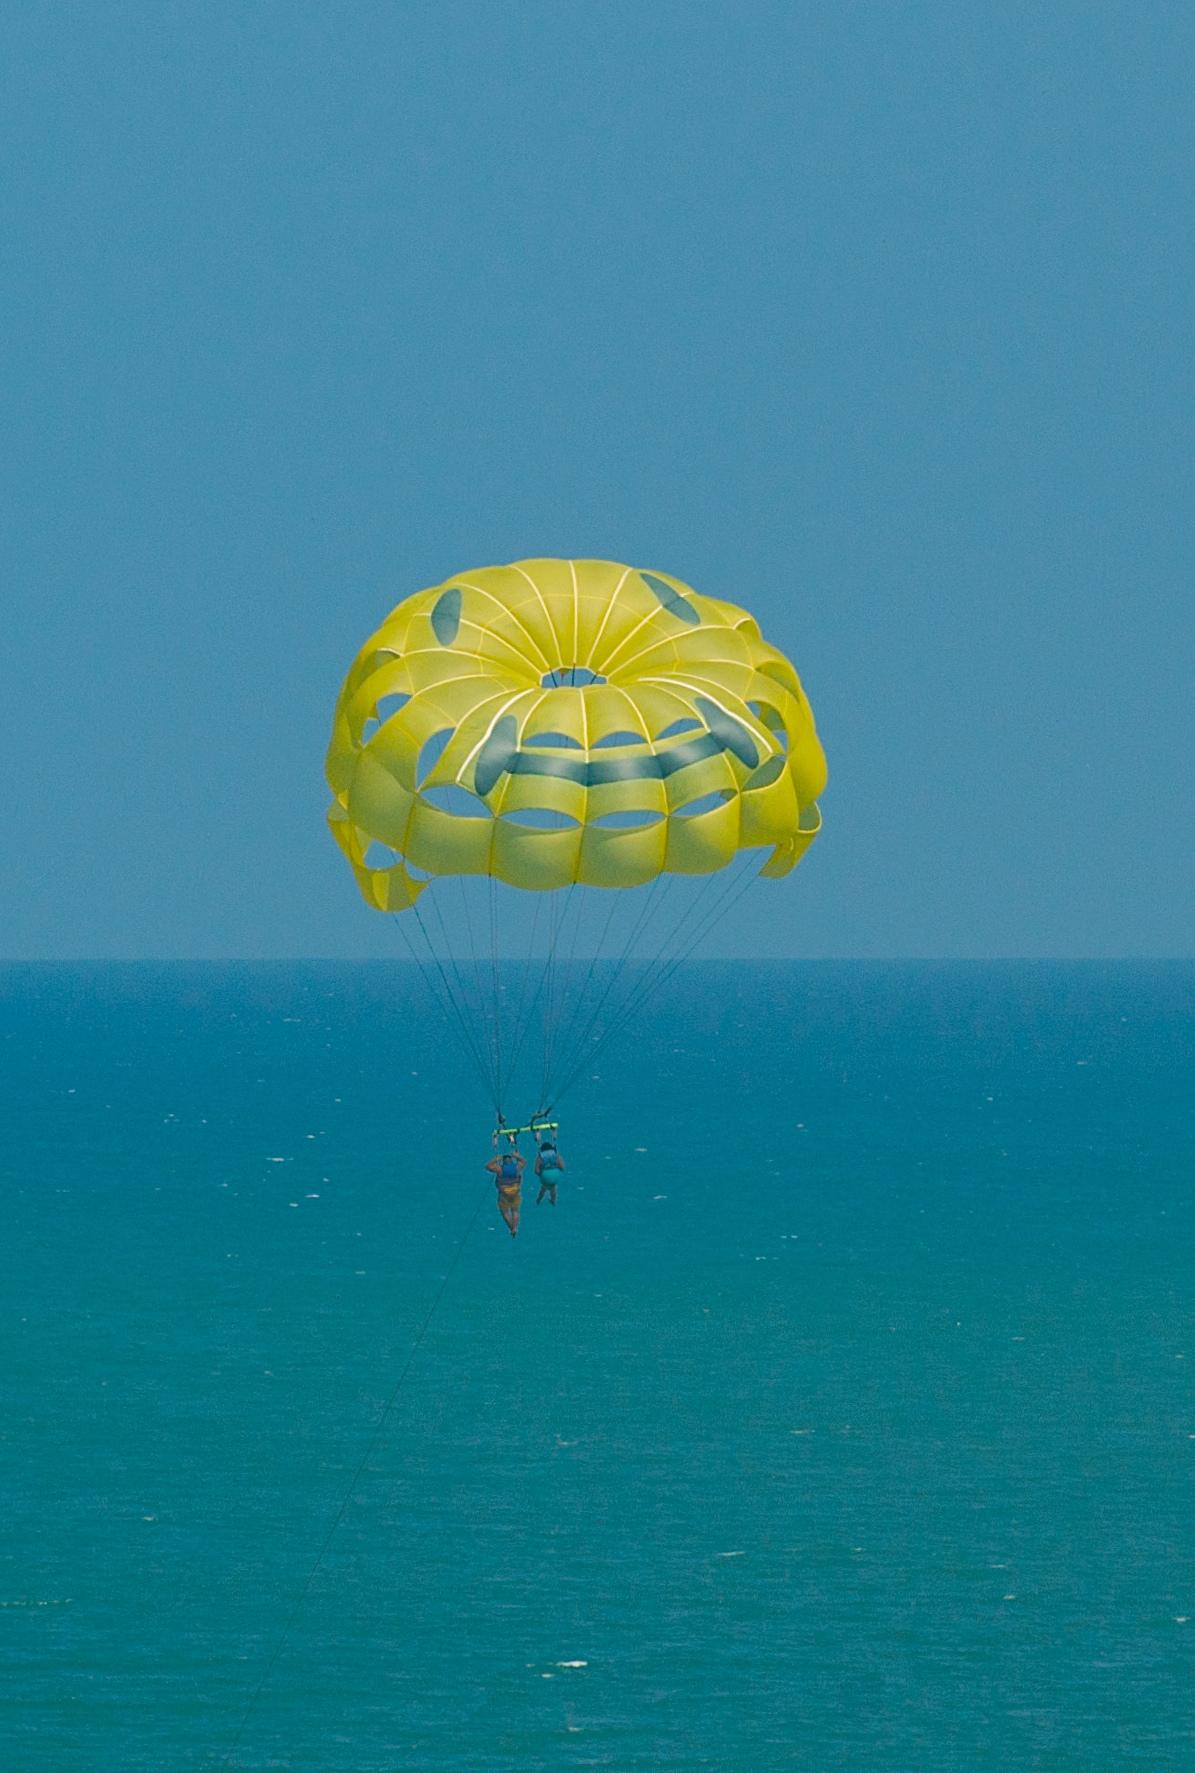 people parasailing with a big green sail in the distance